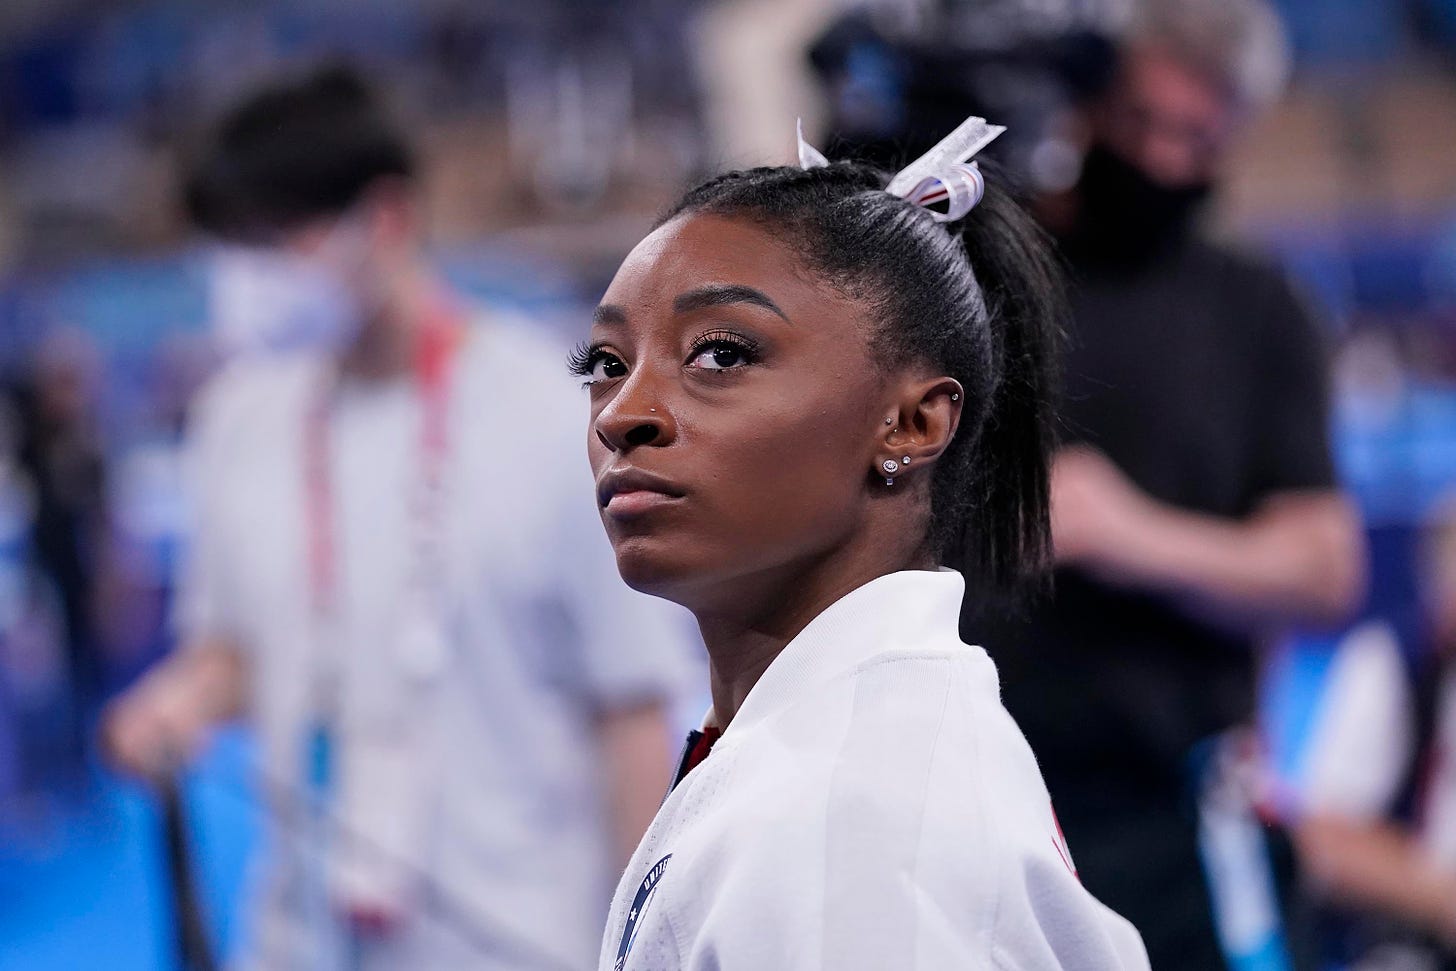 Simone Biles explains why she withdrew from team finals - CNN Video